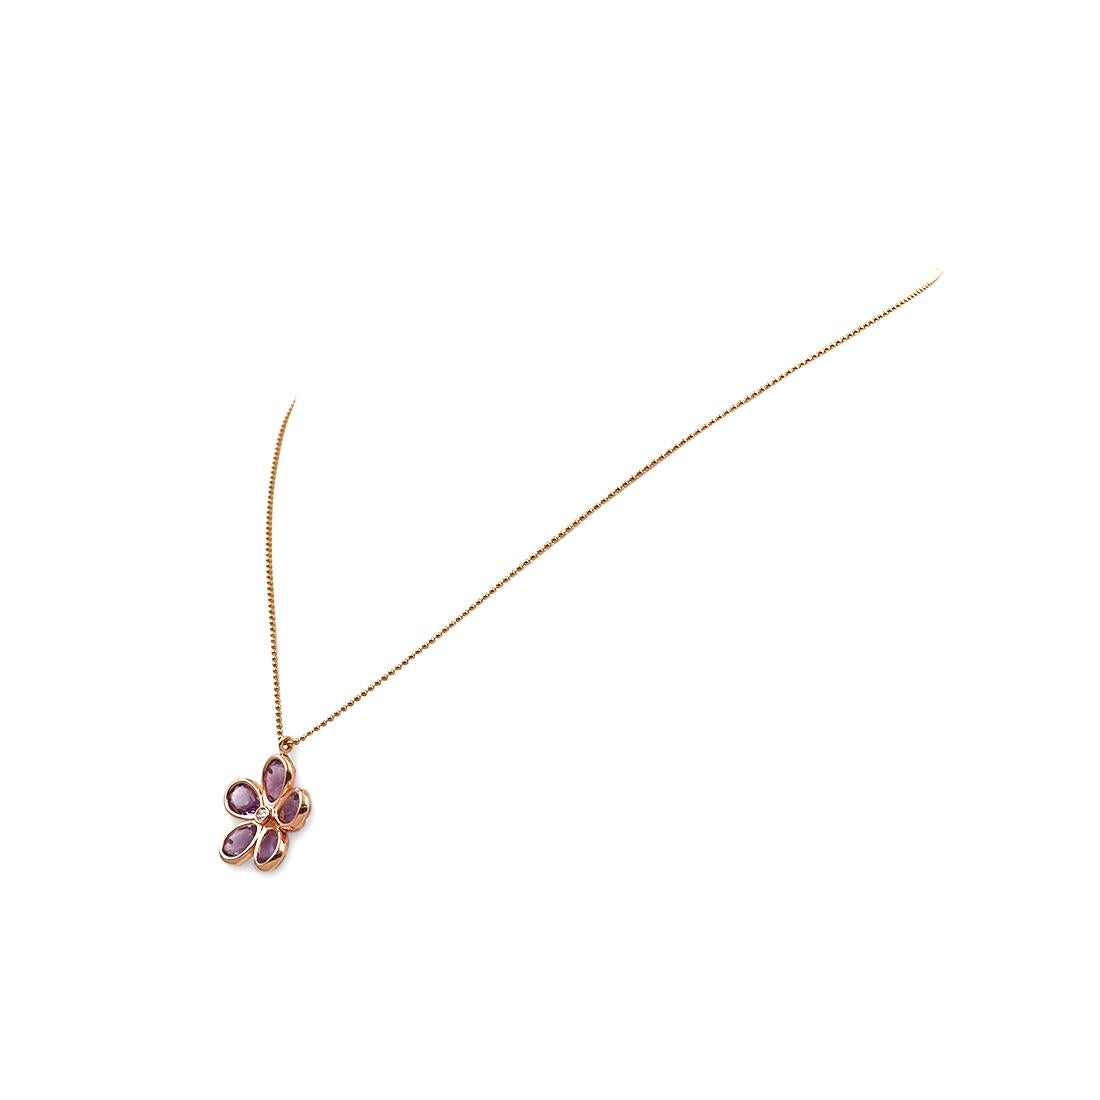 Authentic Tiffany & Co. 'Garden Flower' pendant necklace crafted in 18 karat rose gold. Five teardrop-shaped faceted amethyst stones create the petals with a single round brilliant cut diamond of approximately .04 carats set at the center of the